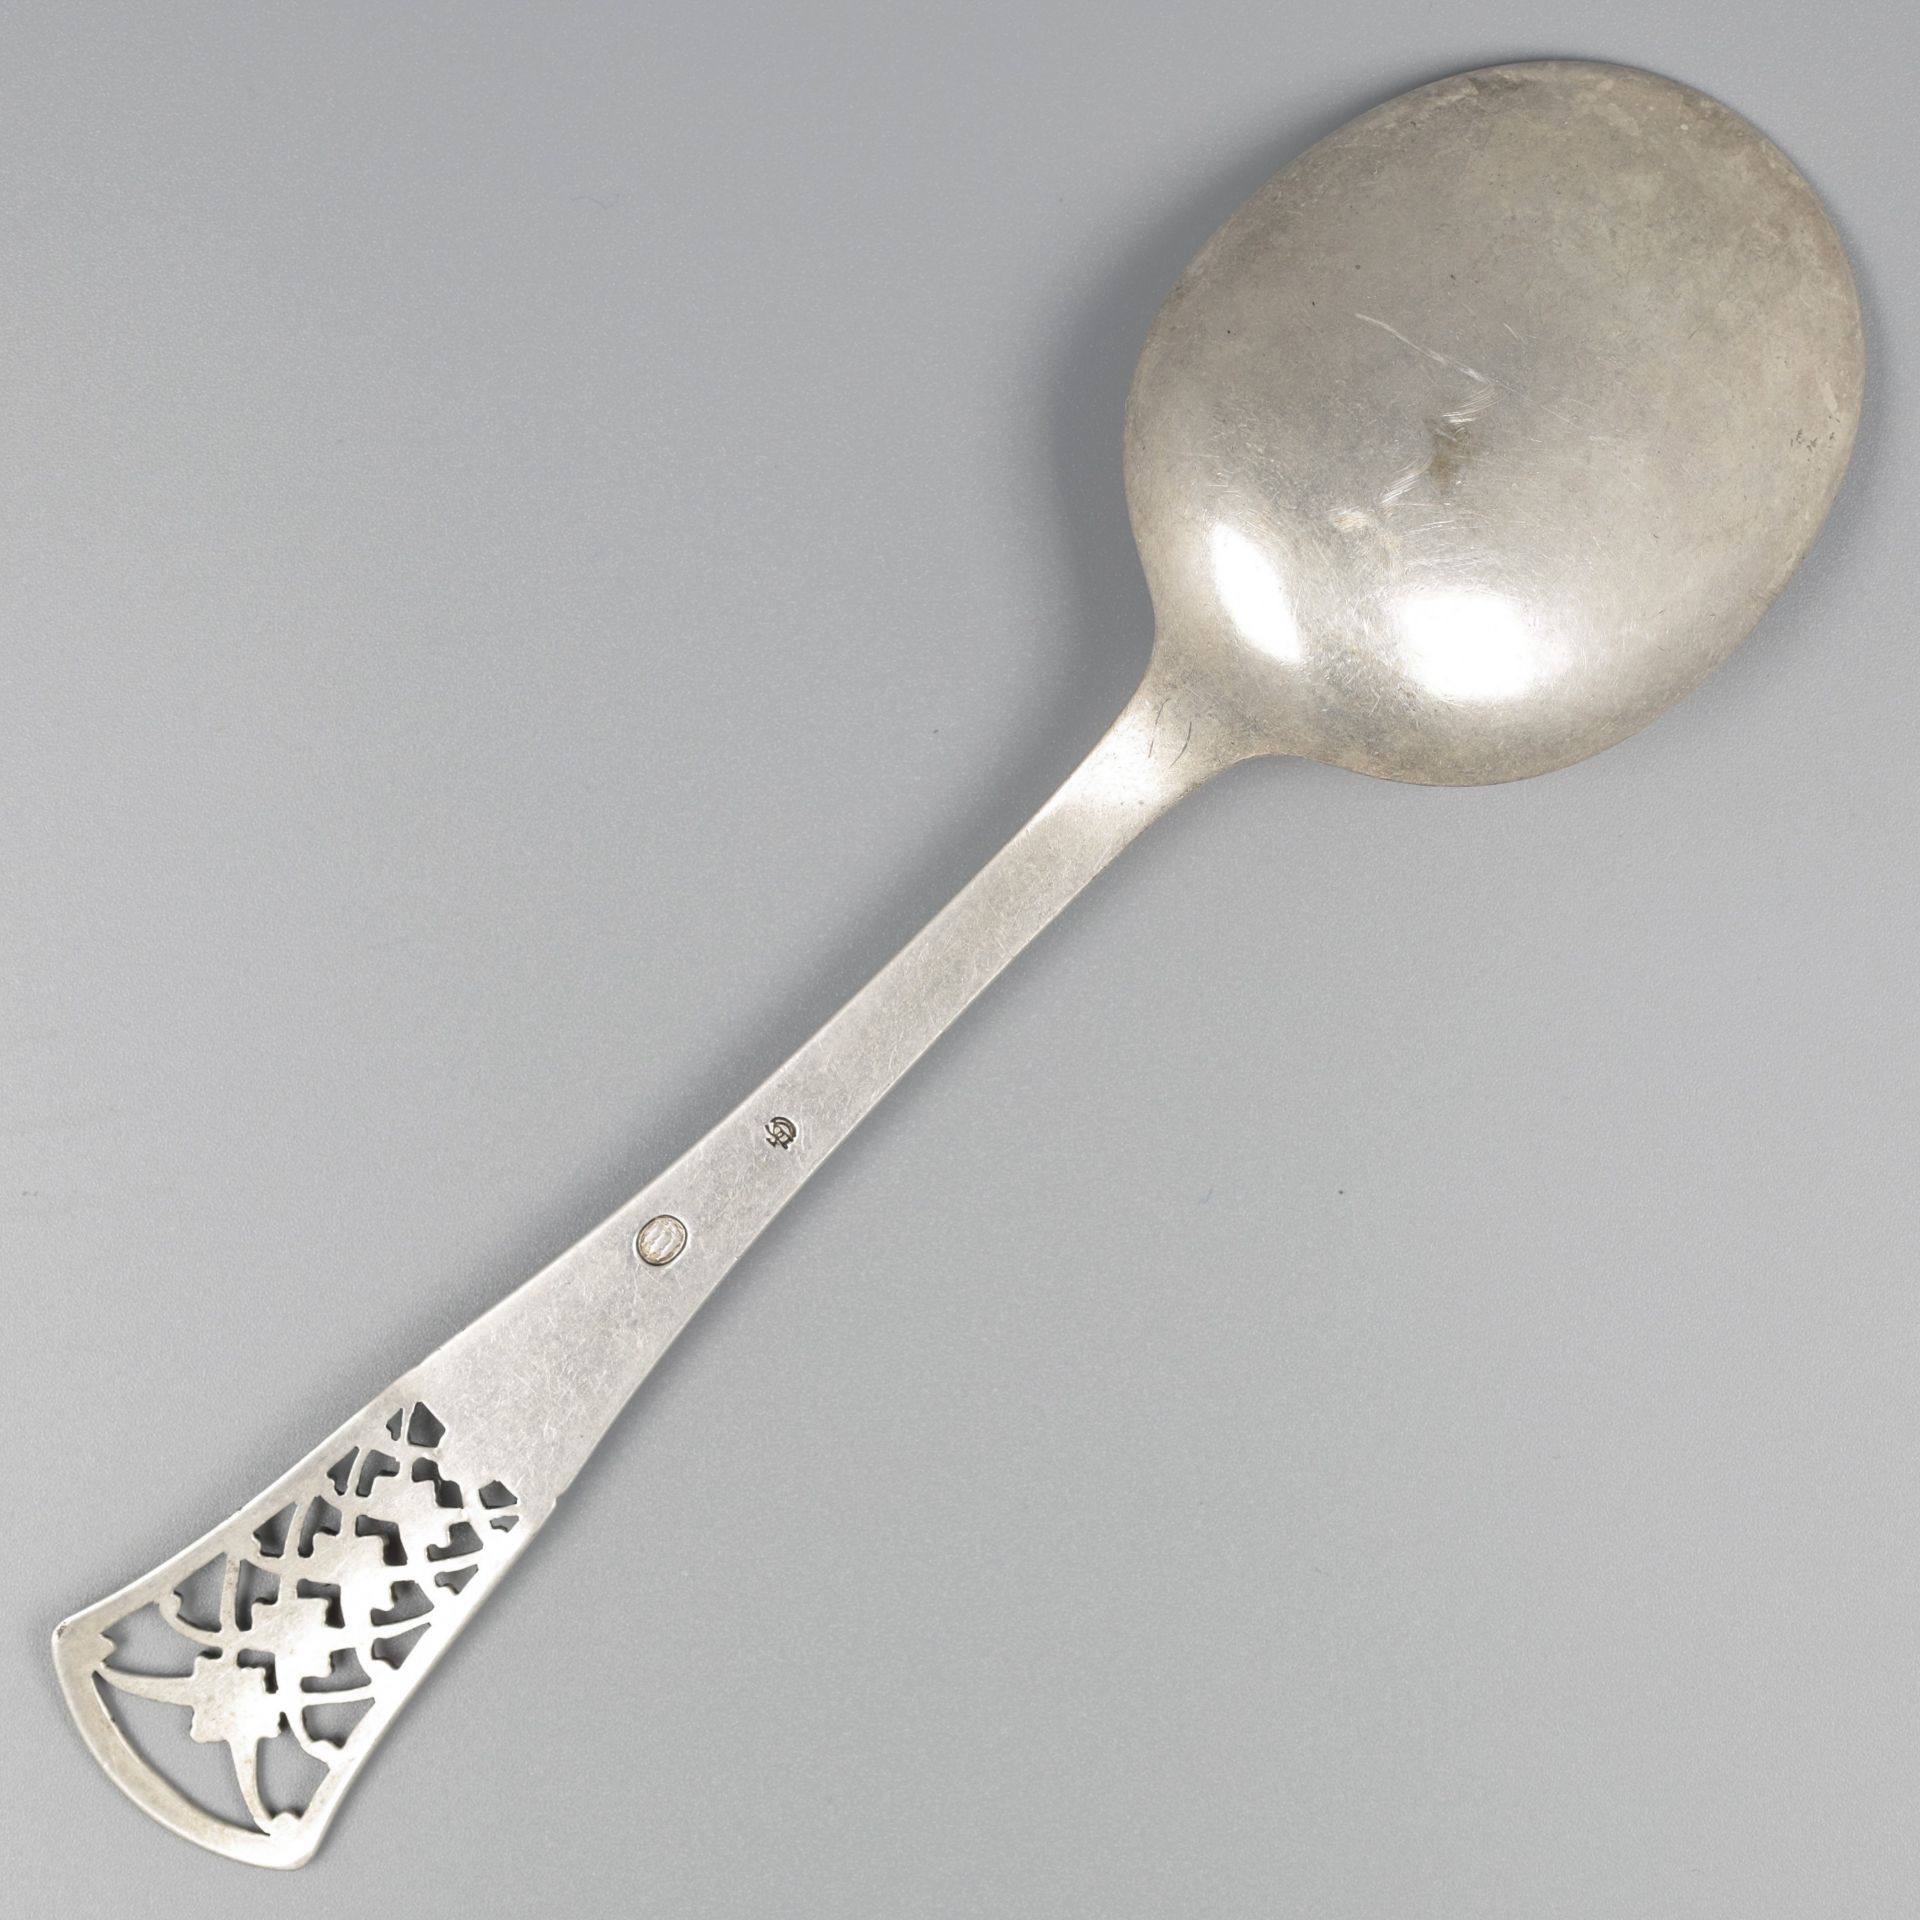 No reserve - Silver serving spoon. - Image 4 of 5